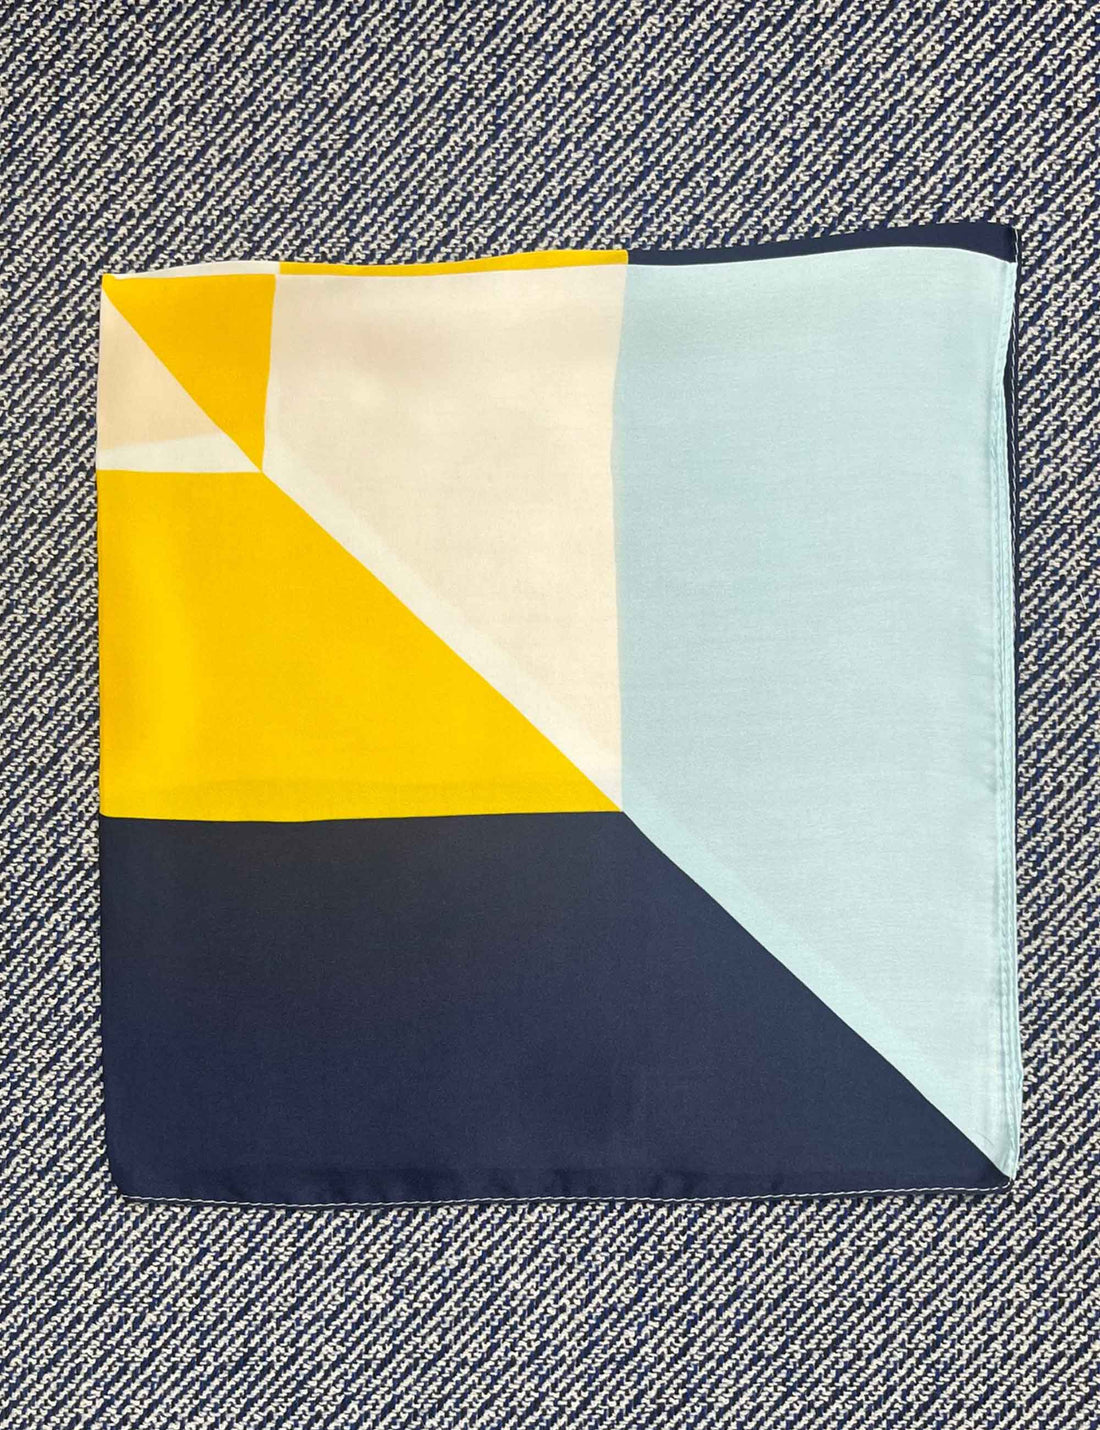 Silk scarf navy/yellow/light blue/off white graphic